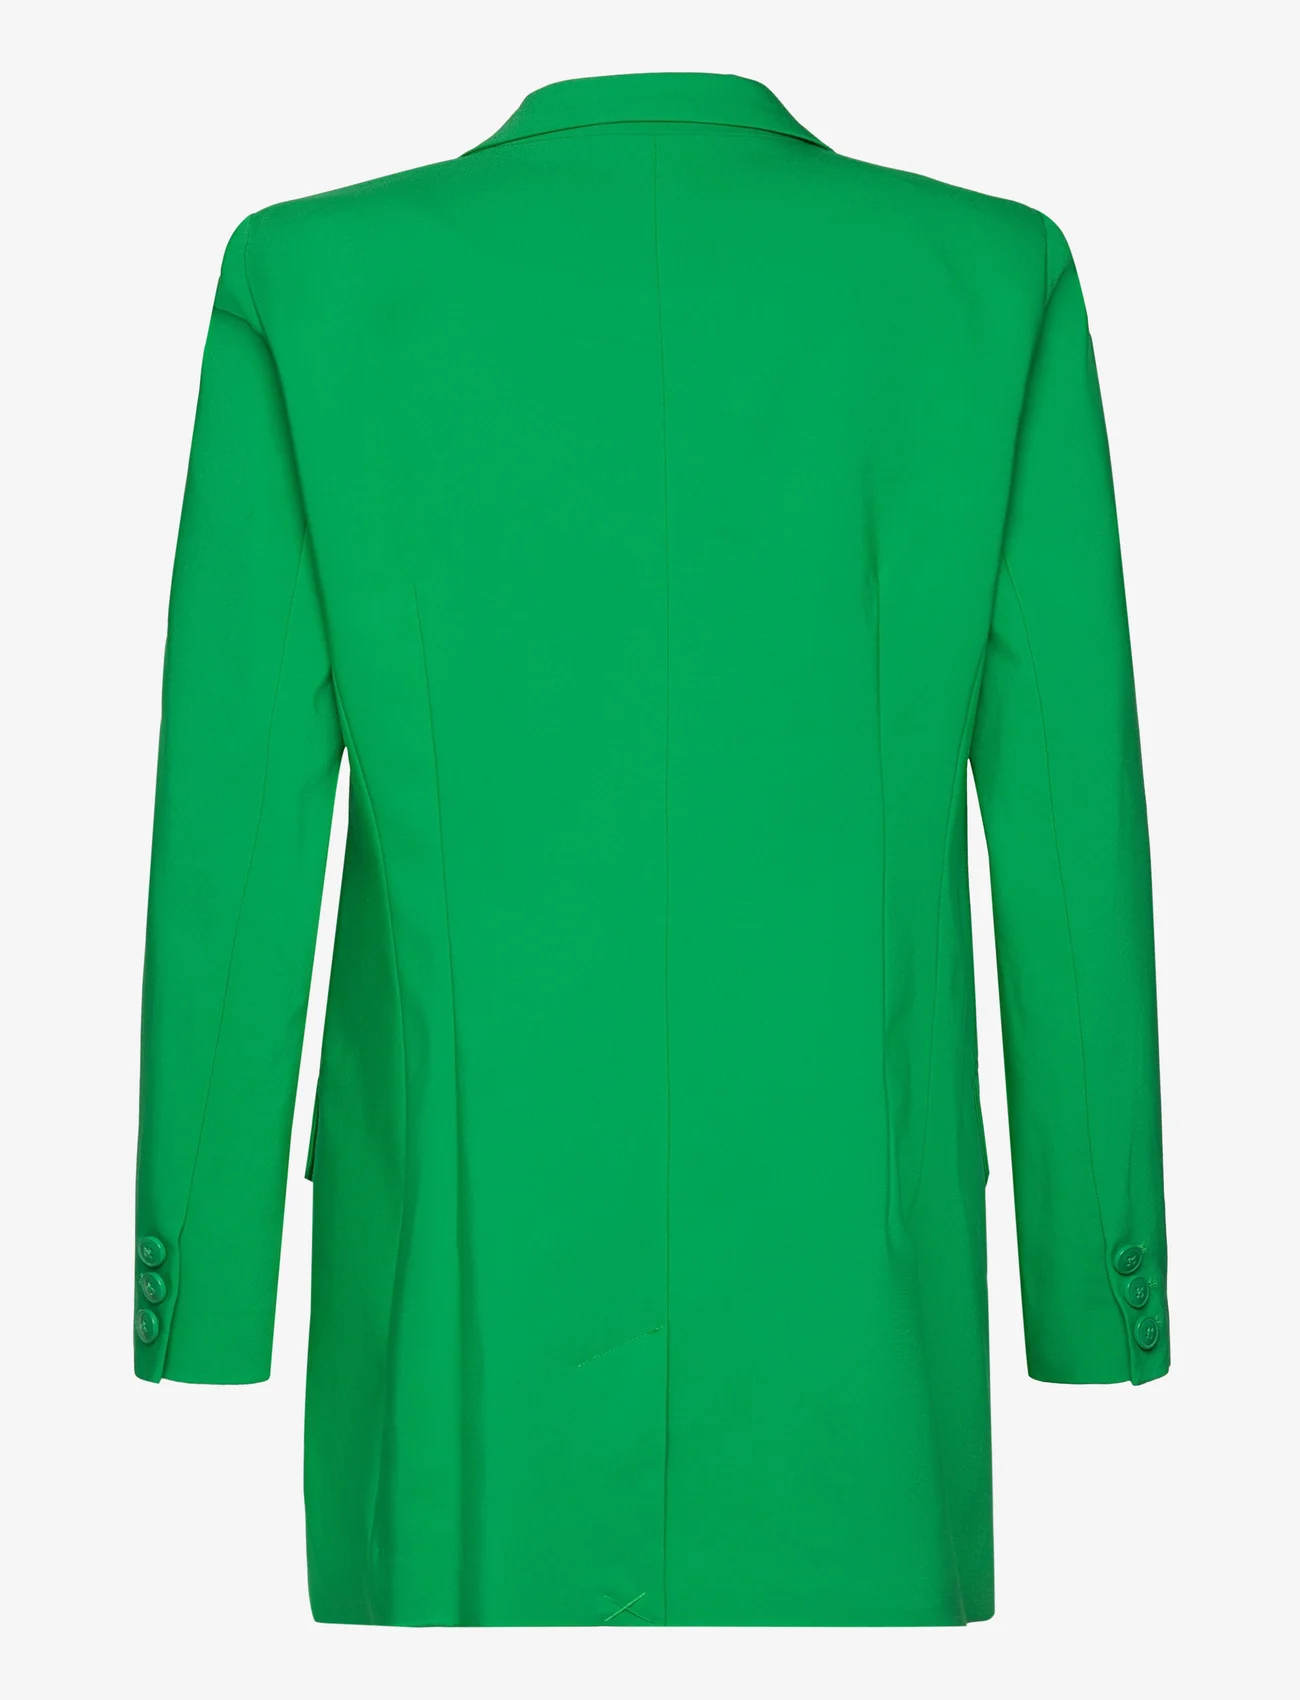 InWear - ZellaIW Long Blazer - party wear at outlet prices - bright green - 1